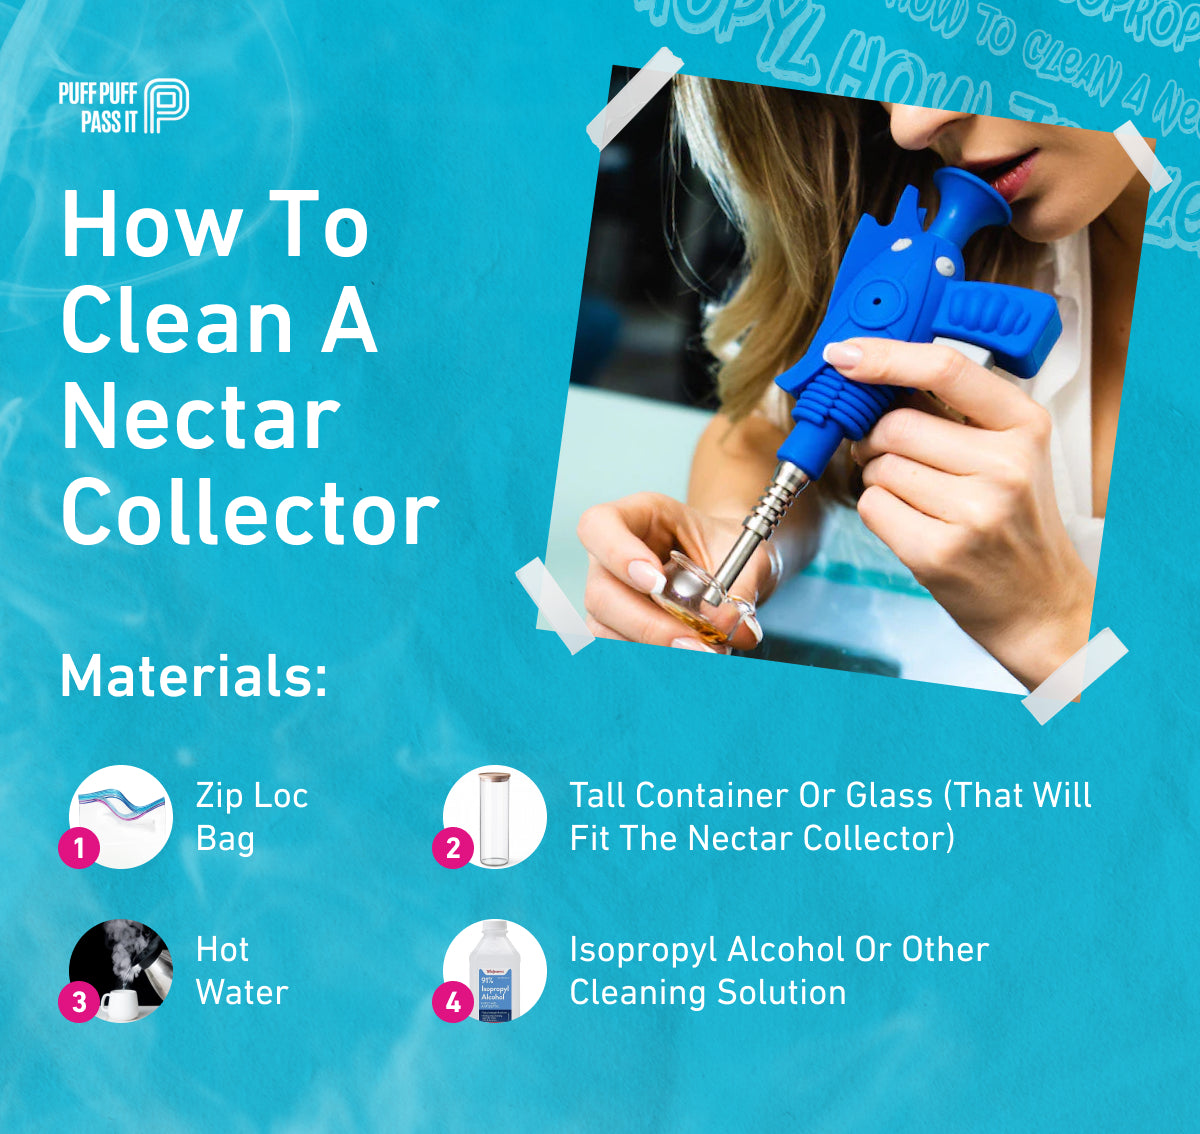 How to clean a nectar collector